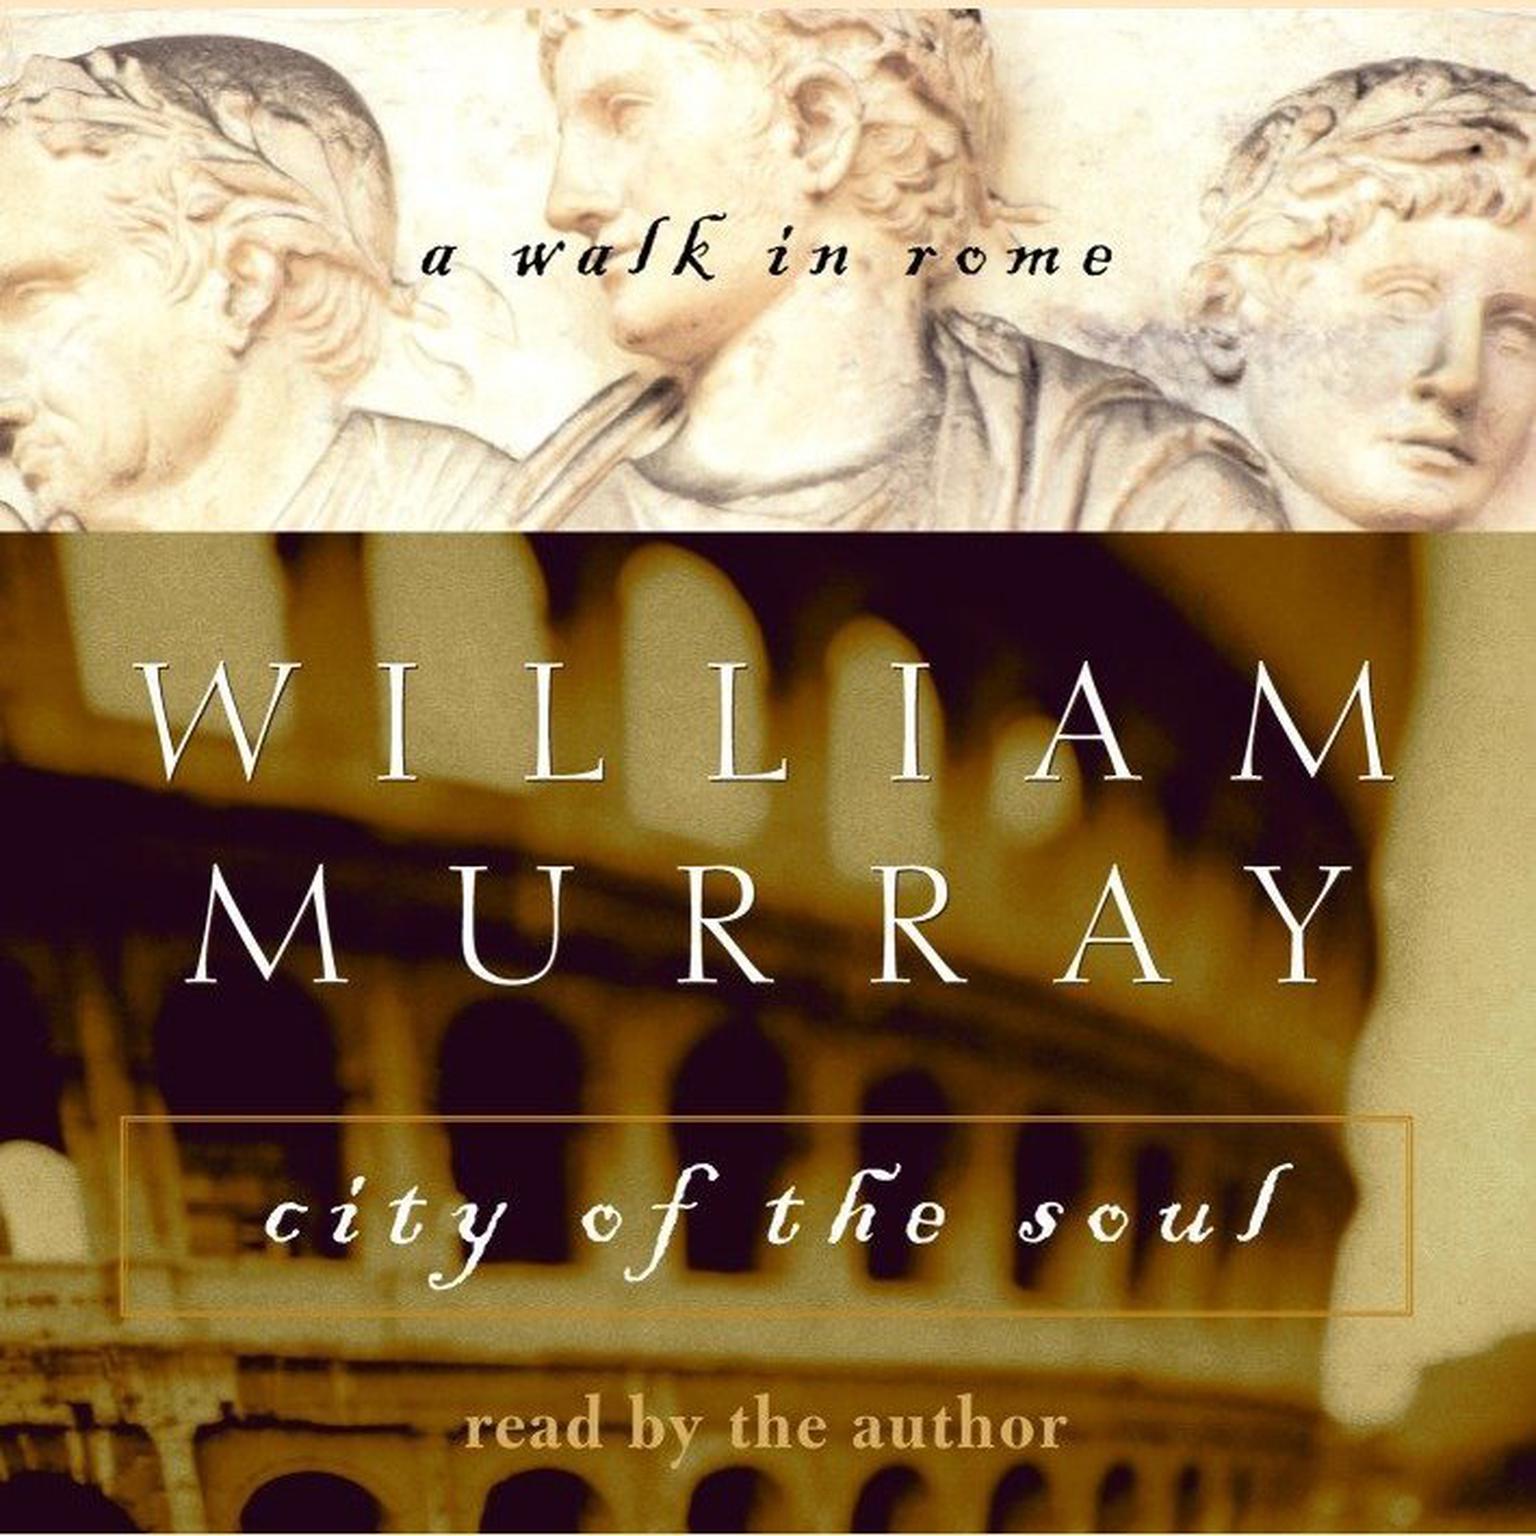 City of the Soul (Abridged): A Walk In Rome Audiobook, by William Murray